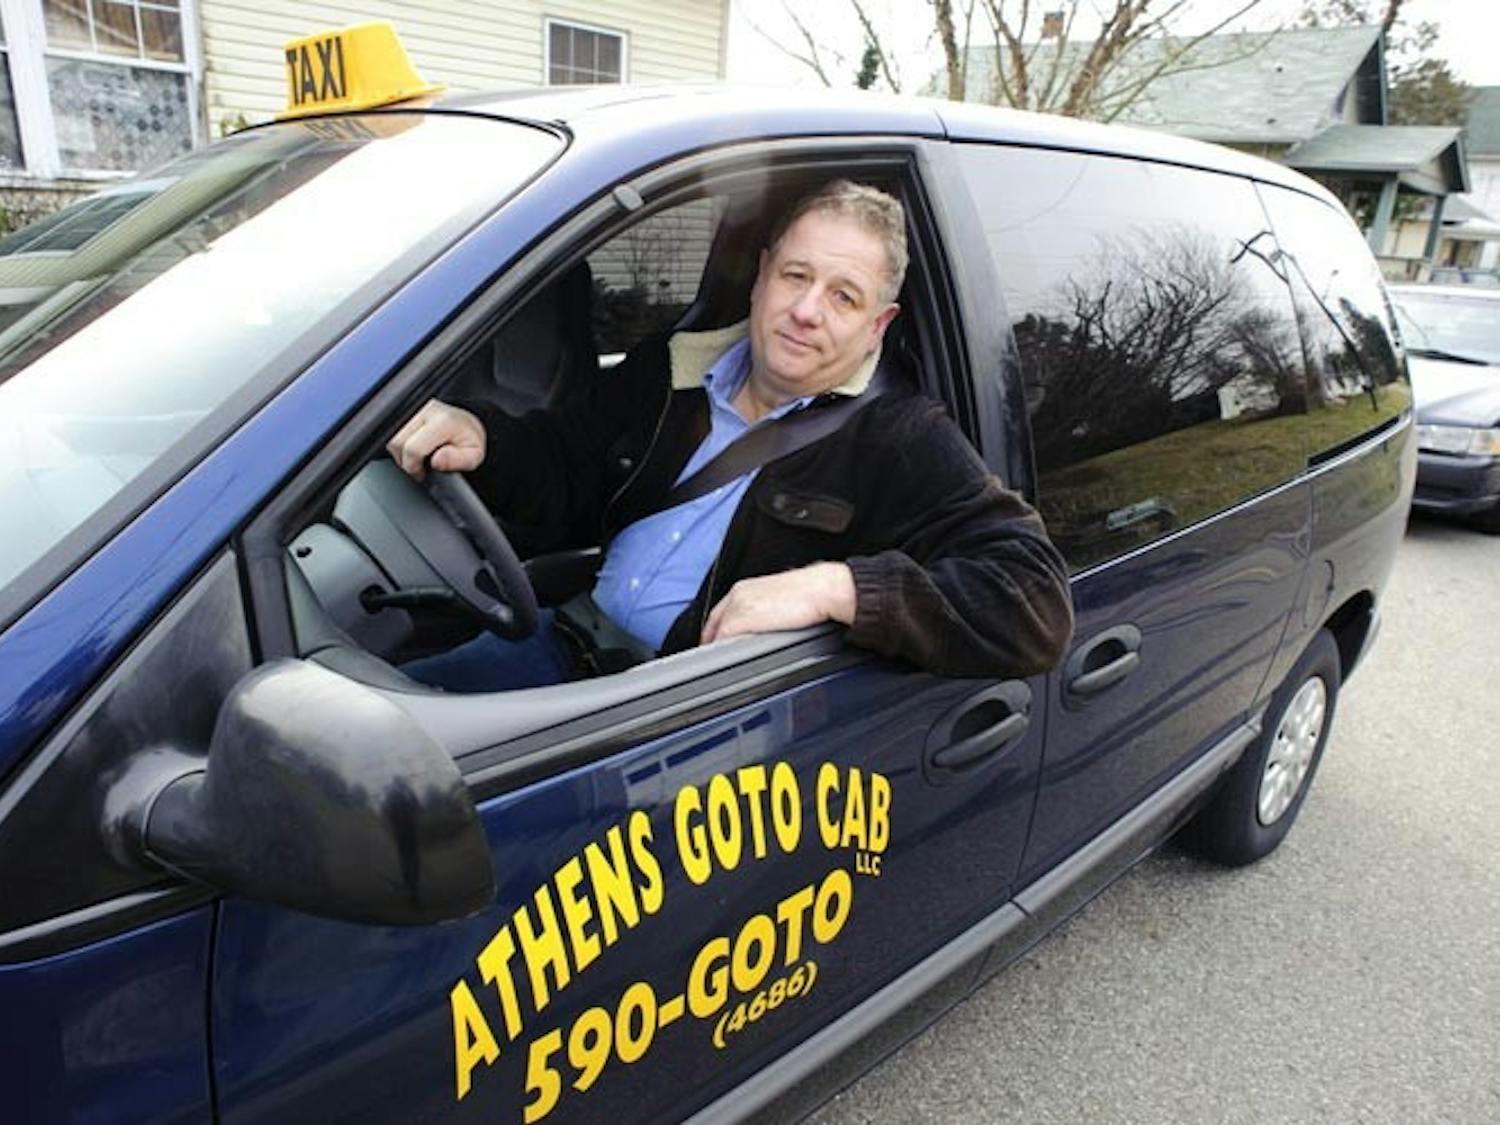 Taxi takers might be dialing wrong number  